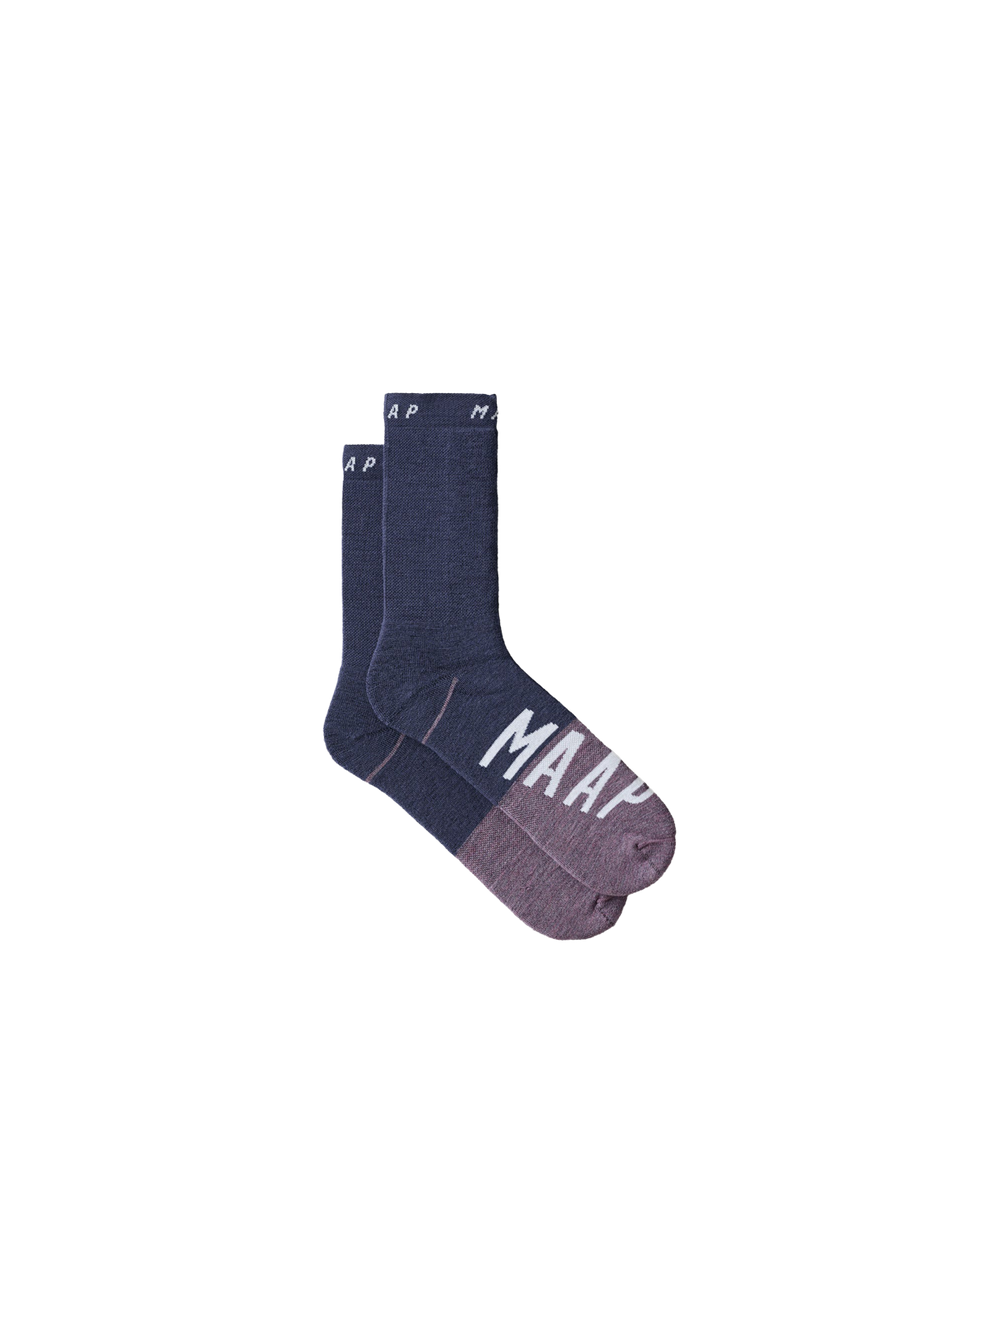 Product Image for Apex Wool Sock